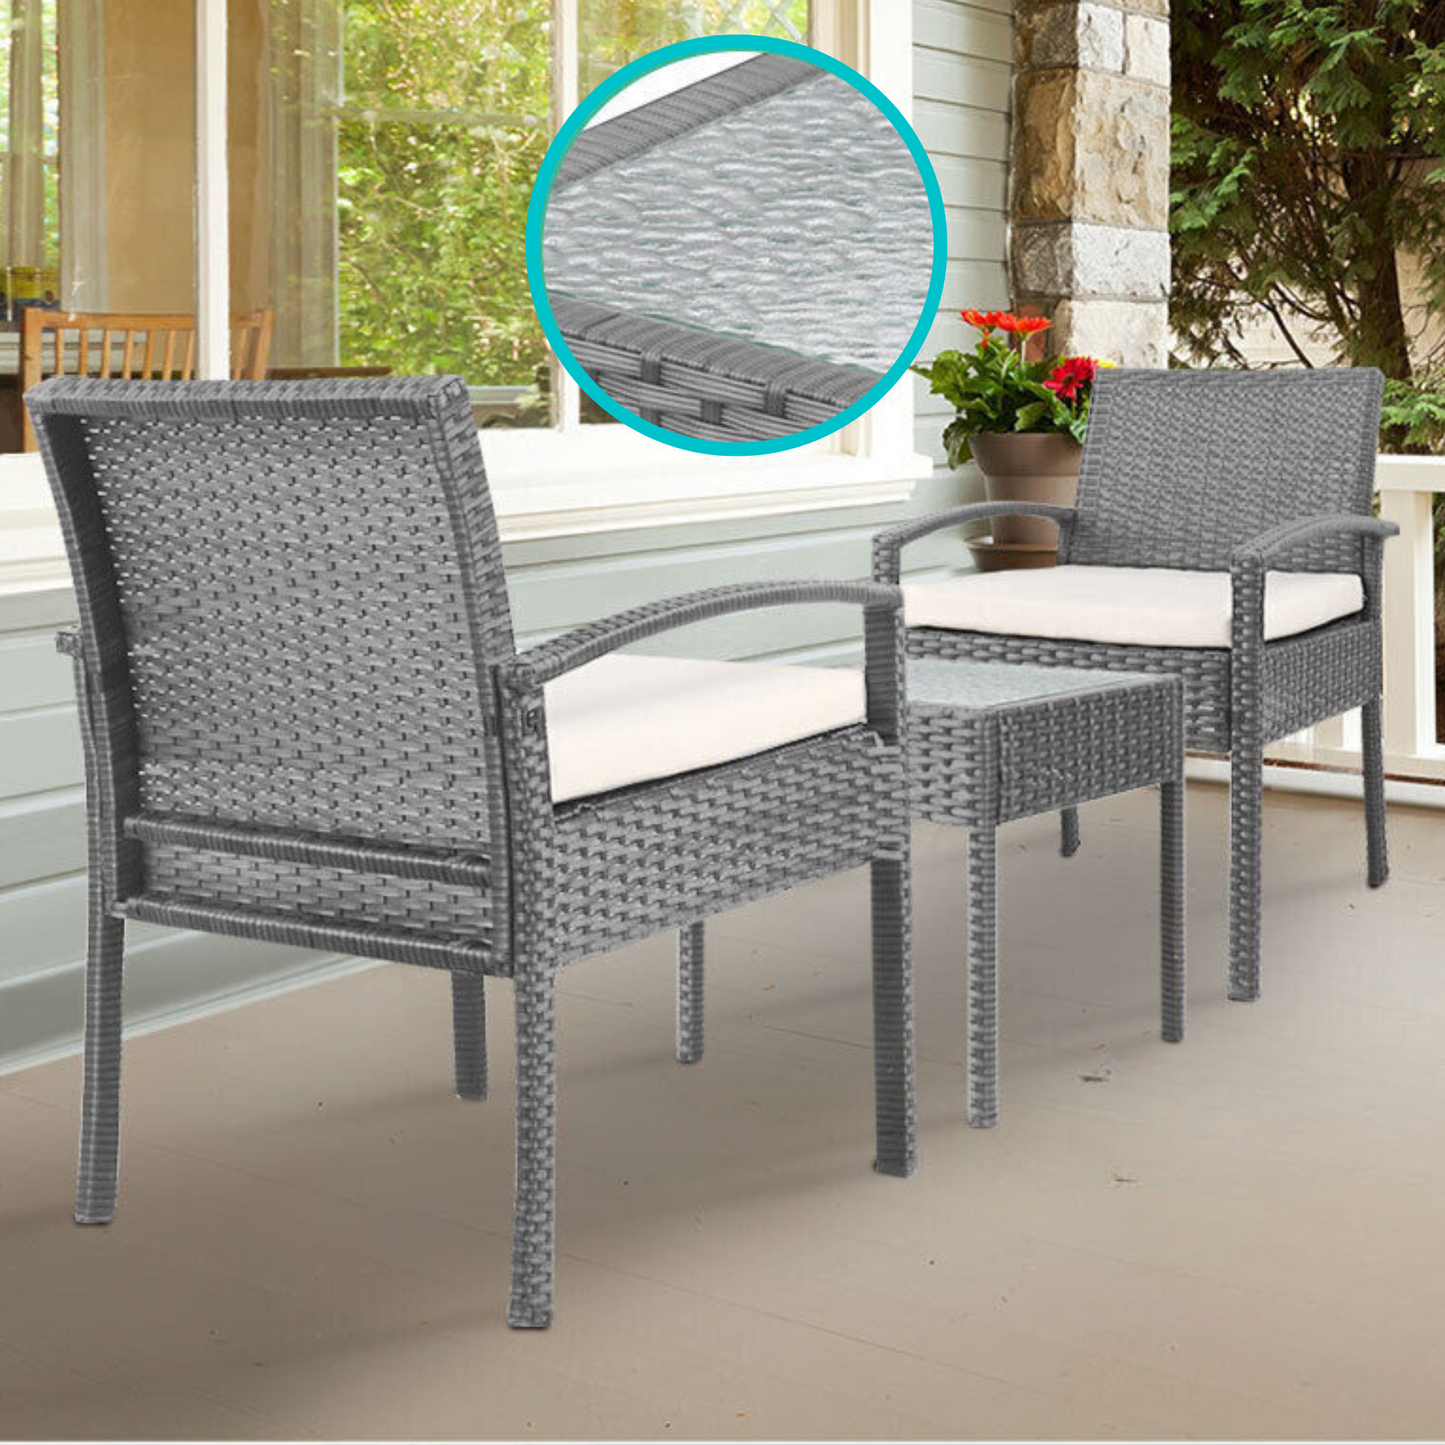 Boho ↡↟ Vibe Collection ↠ Grey Wicker Coastal 3 Piece Outdoor Setting Boho Chairs & Table Furniture Set